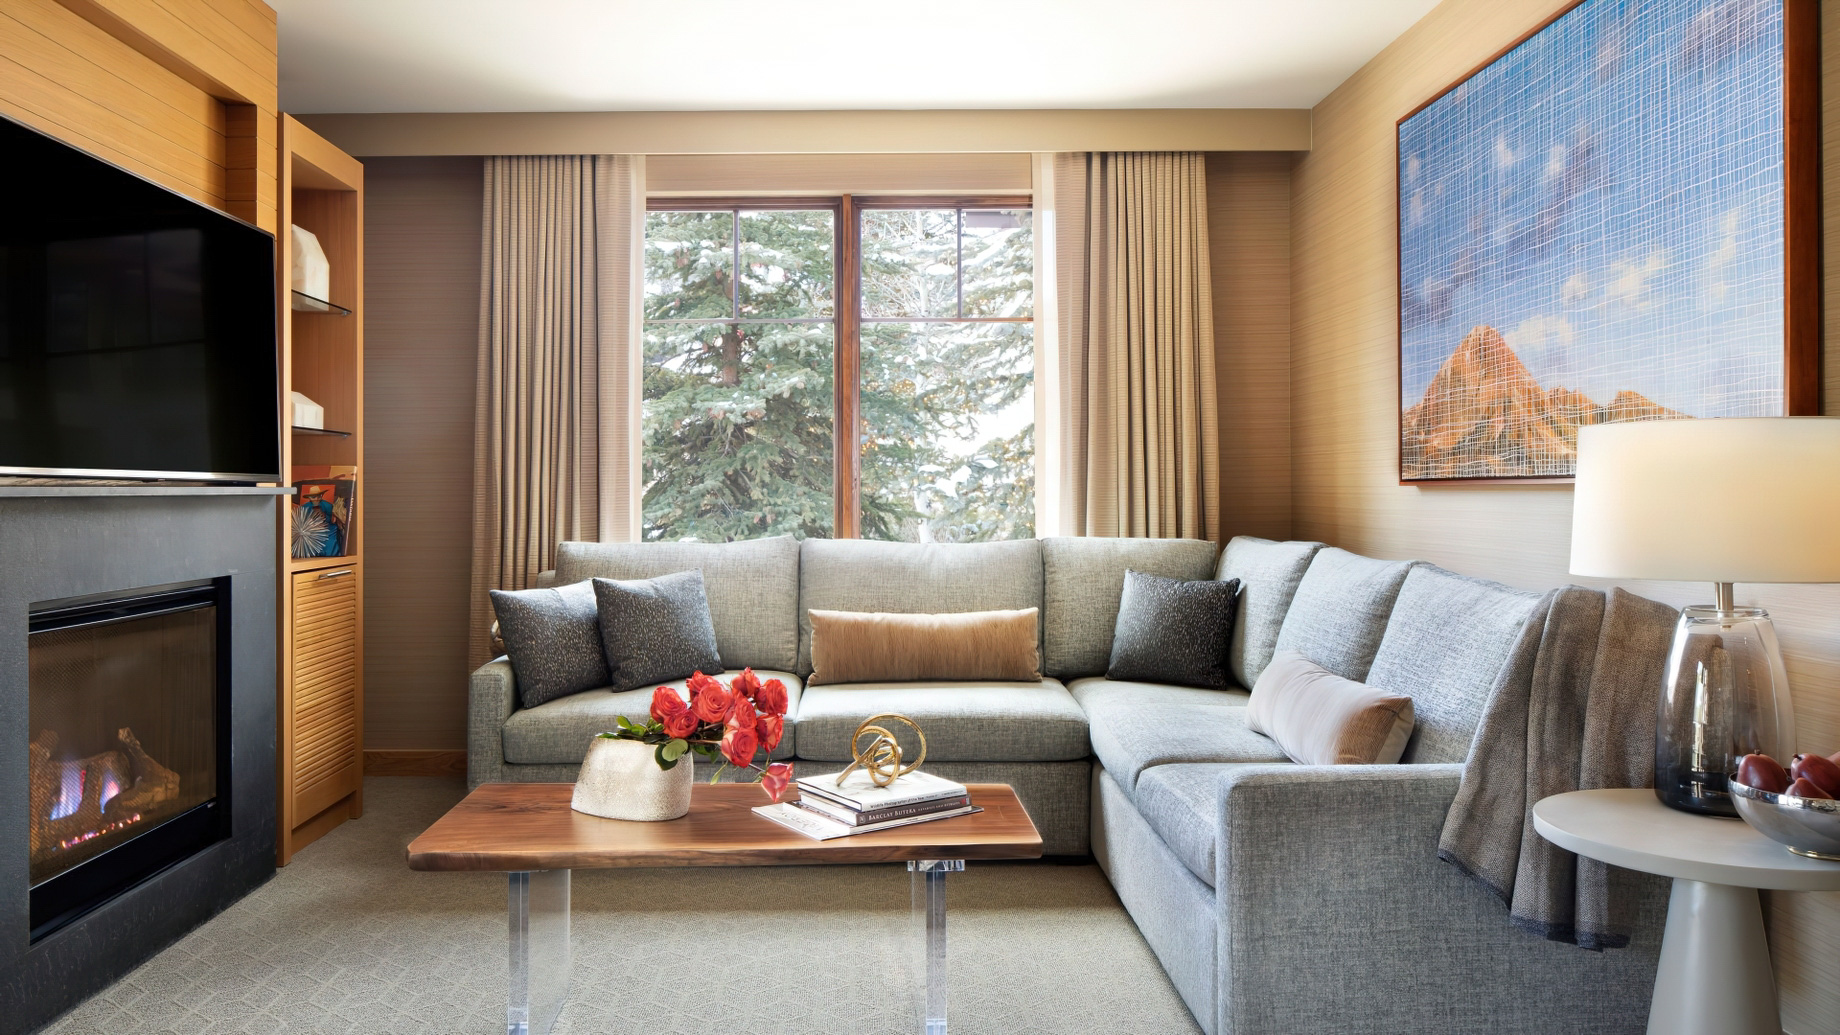 Viceroy Snowmass Luxury Resort – Aspen Snowmass Village, CO, USA – Four Bedroom Residential Suite